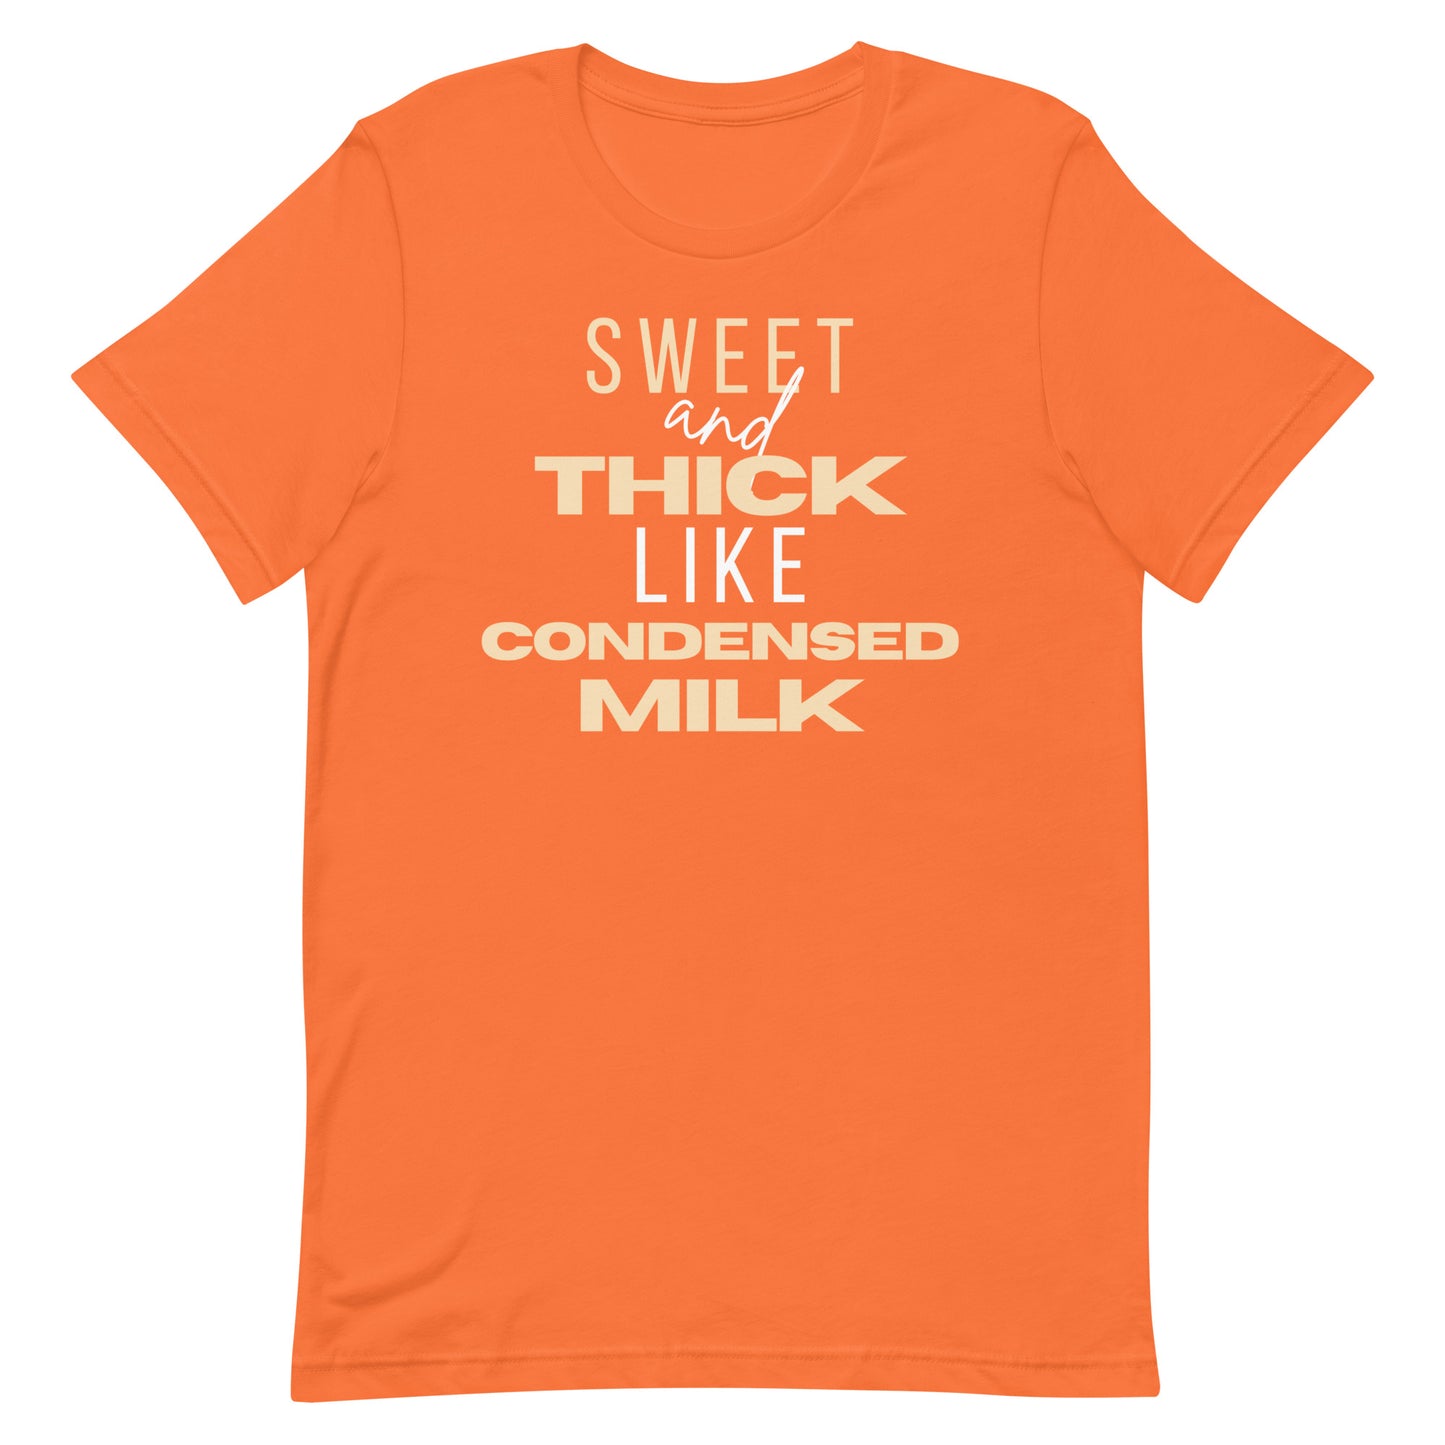 "Sweet and Thick like Condensed Milk" Unisex t-shirt